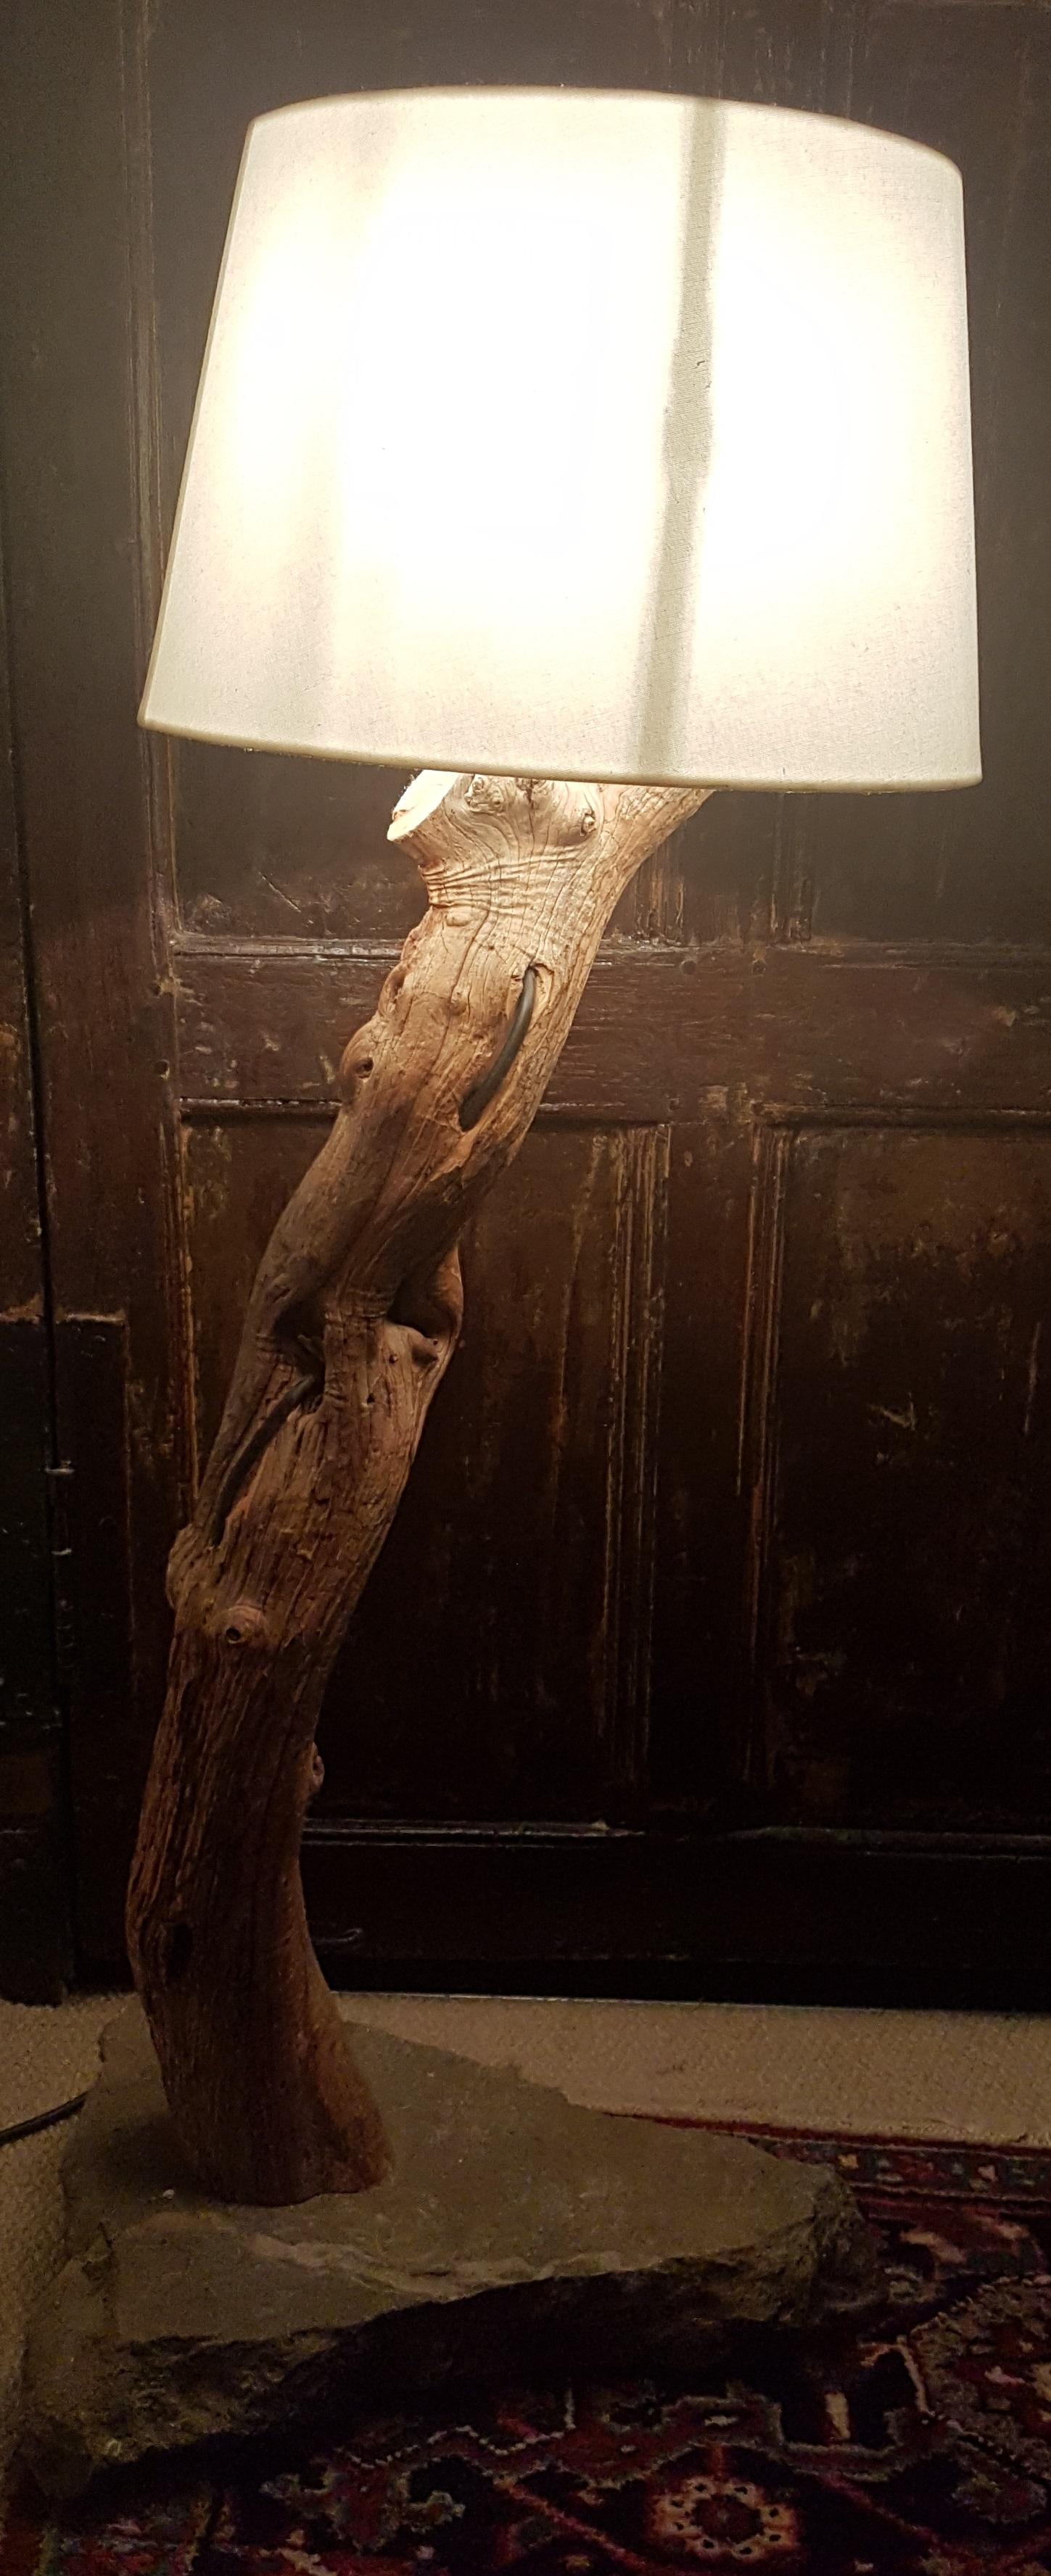 Bespoke Tree Form Sandalwood Floor Lamp In Distressed Condition For Sale In Bodicote, Oxfordshire